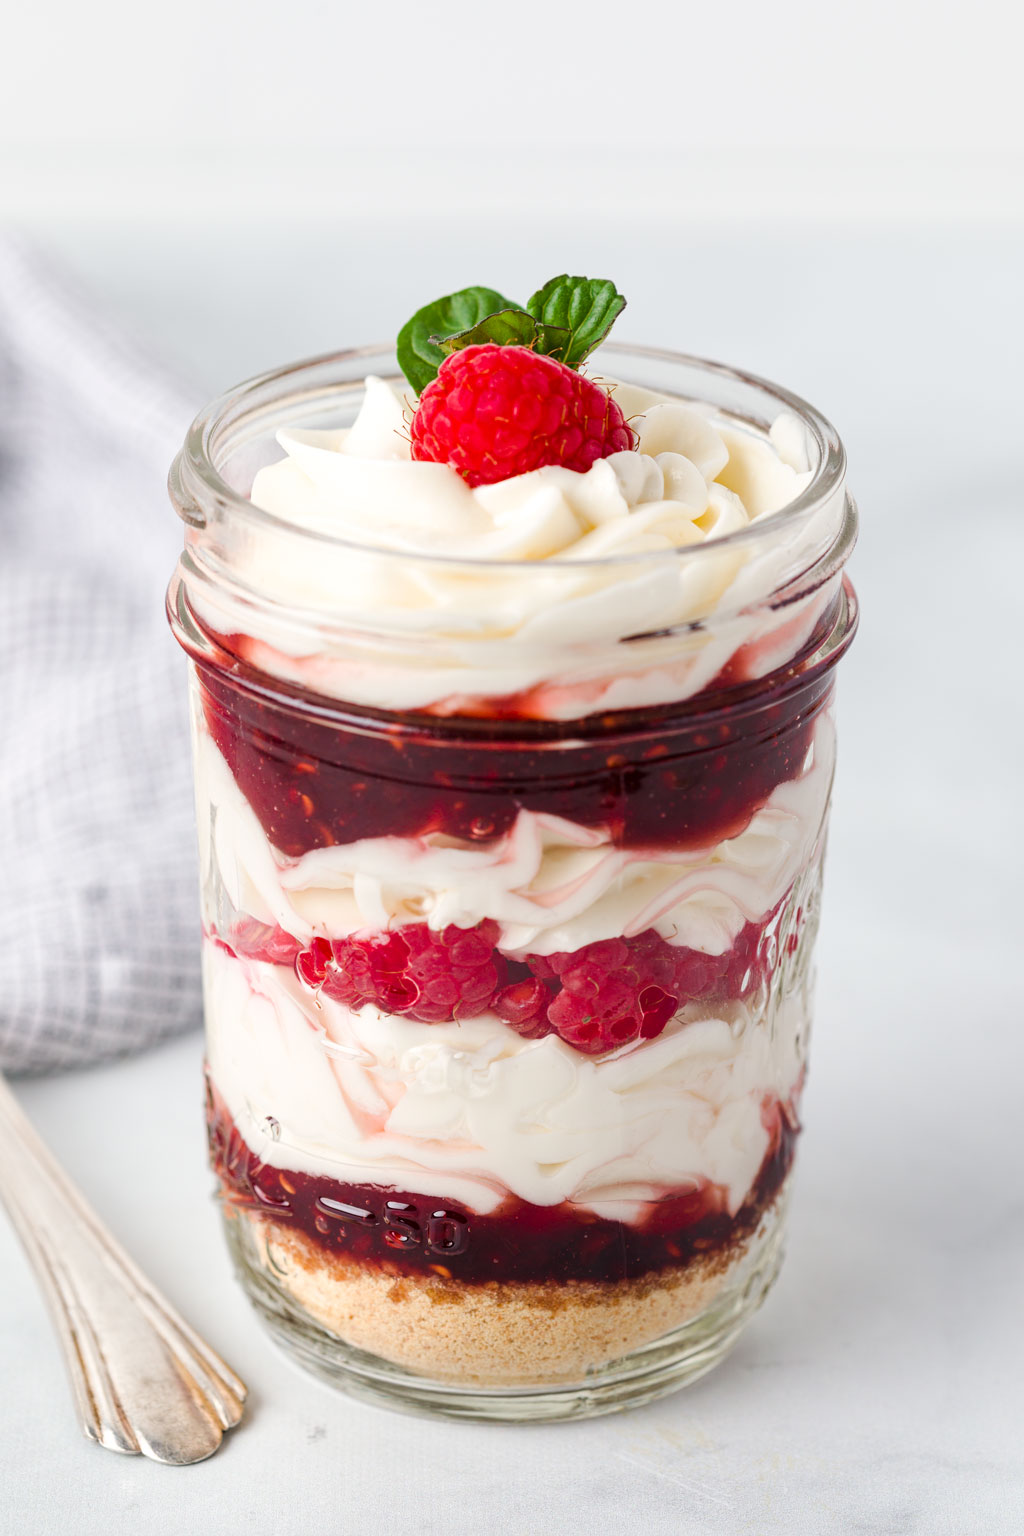 Garnish the top with raspberries and mint